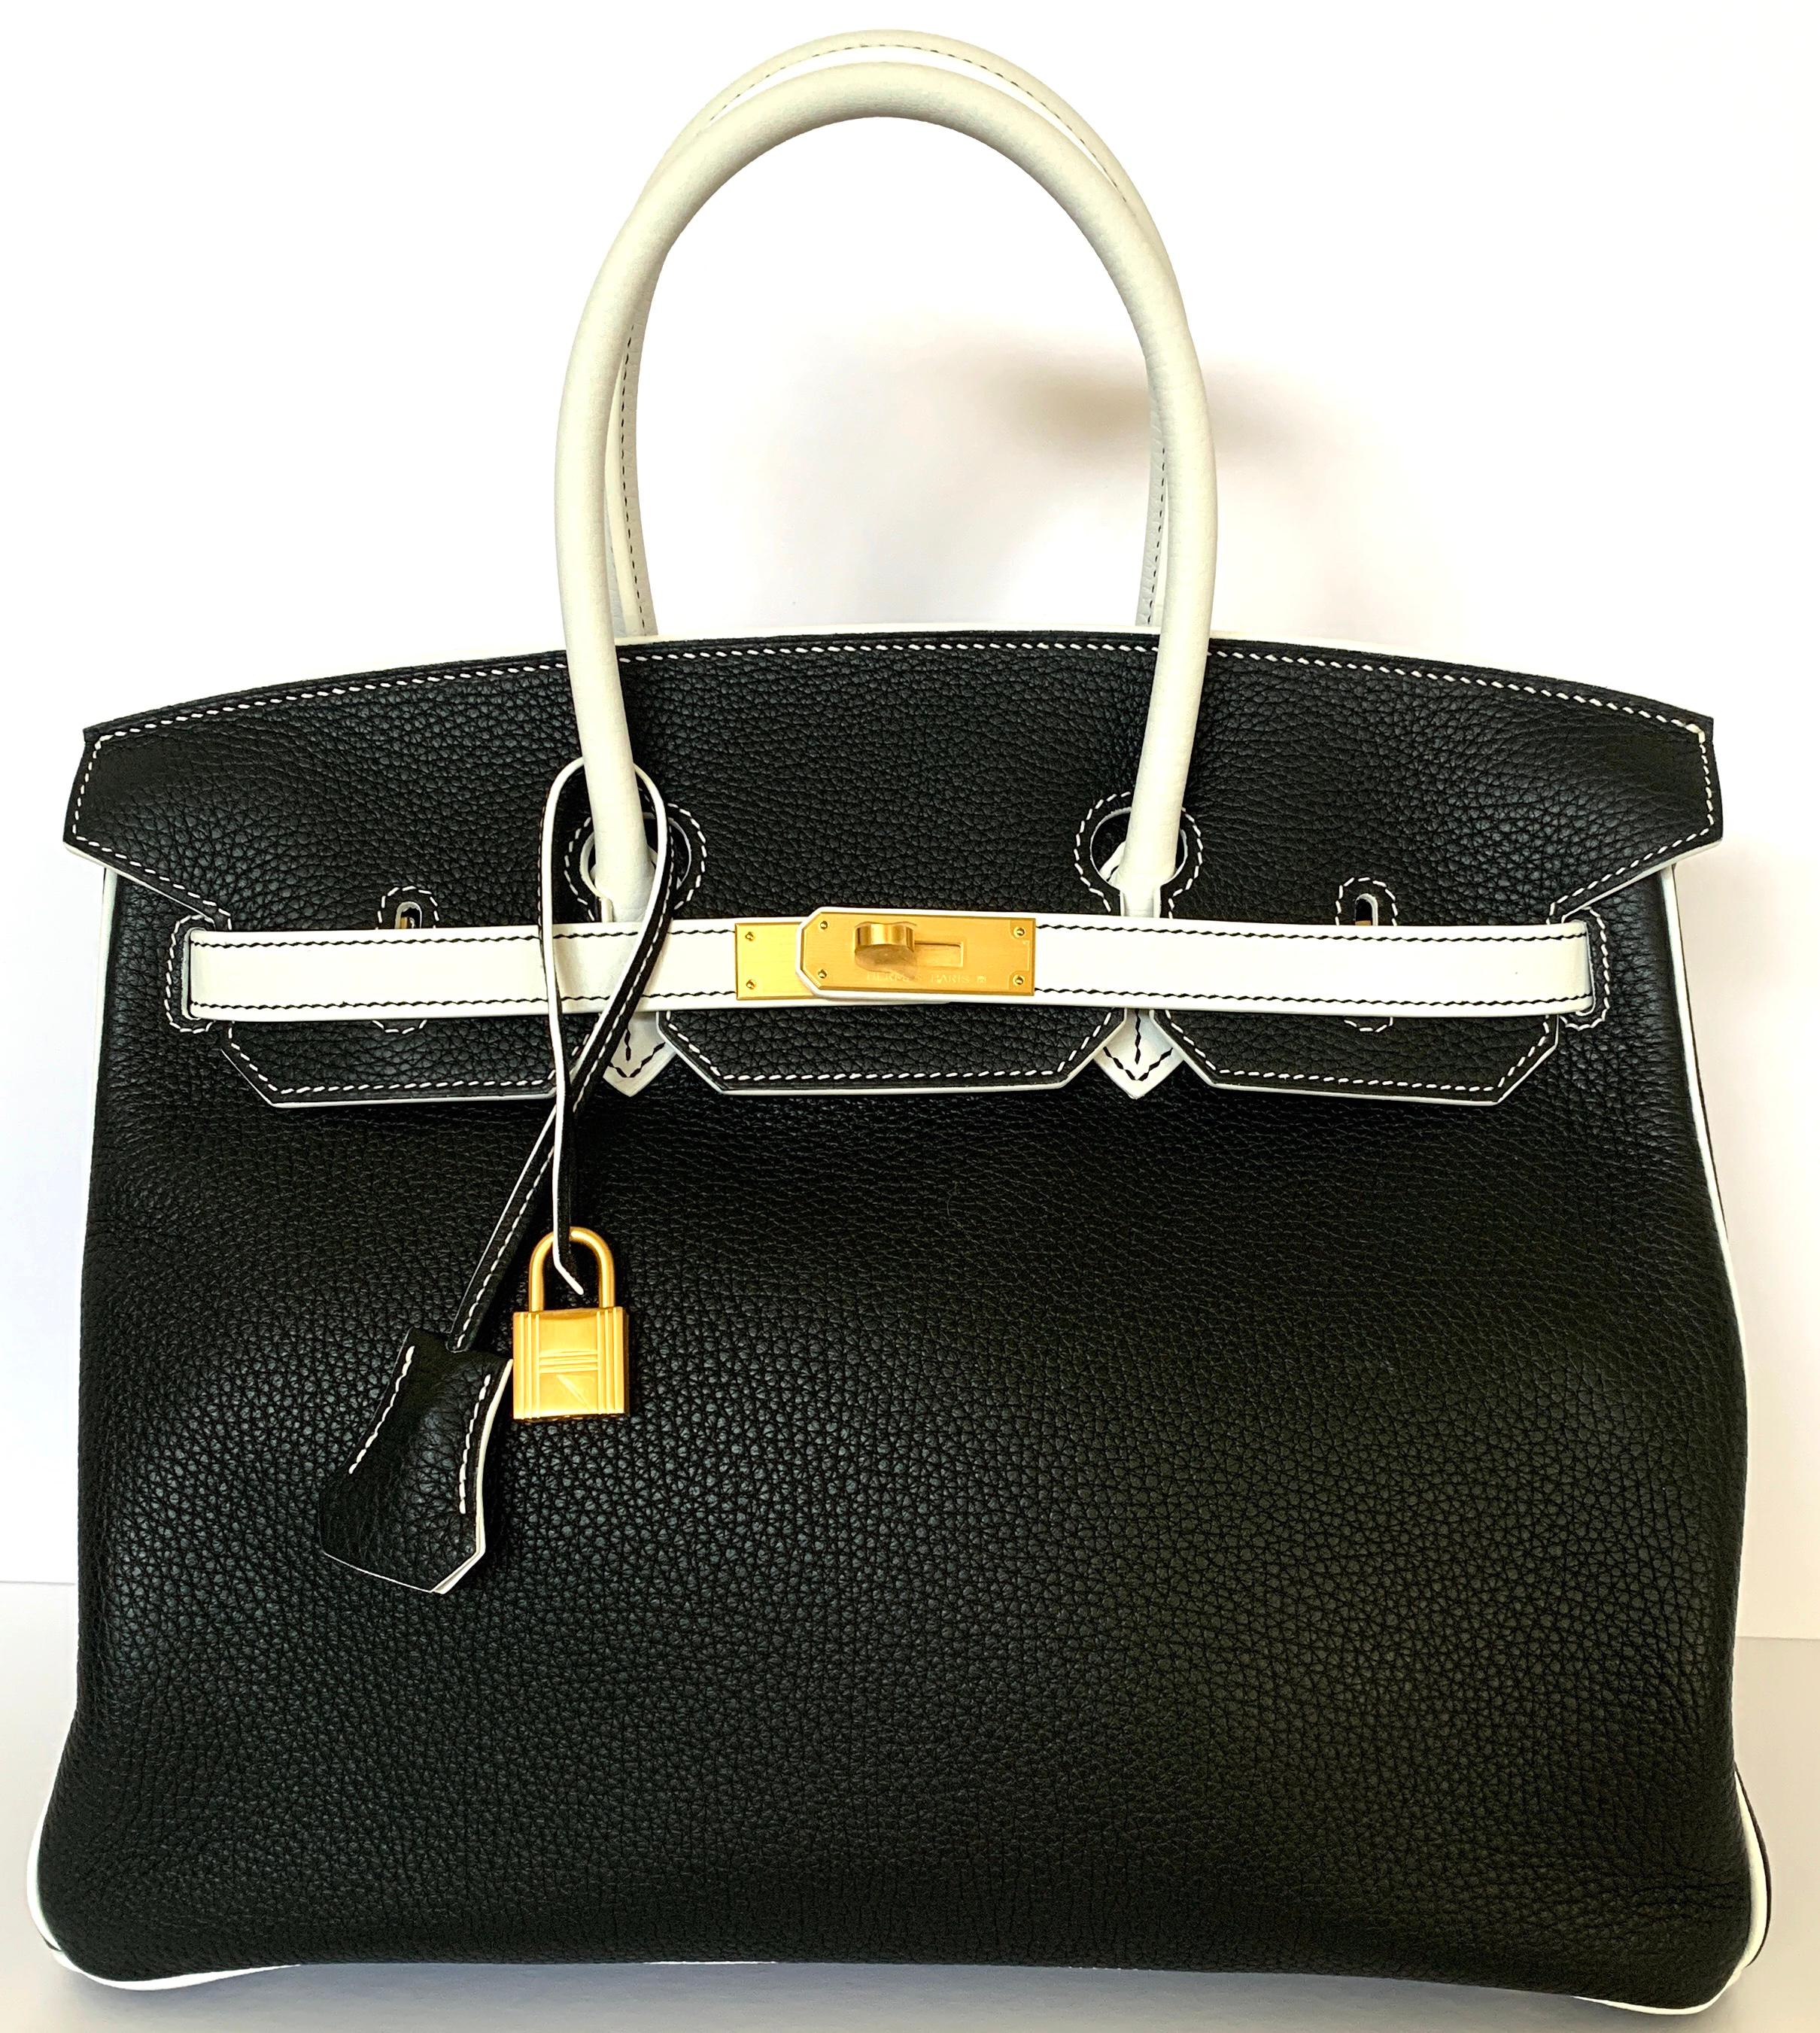 Hermes 35cm Birkin
Specially ordered for VIP
ABSOLUTLEY STUNNING
Black and White Clemence Leather
Notice the contrasting top stitching details
Brushed Gold Hardware, making it a real stand out in a crowd
Interior pocket
Lock and 2 keys
Hermes Box,